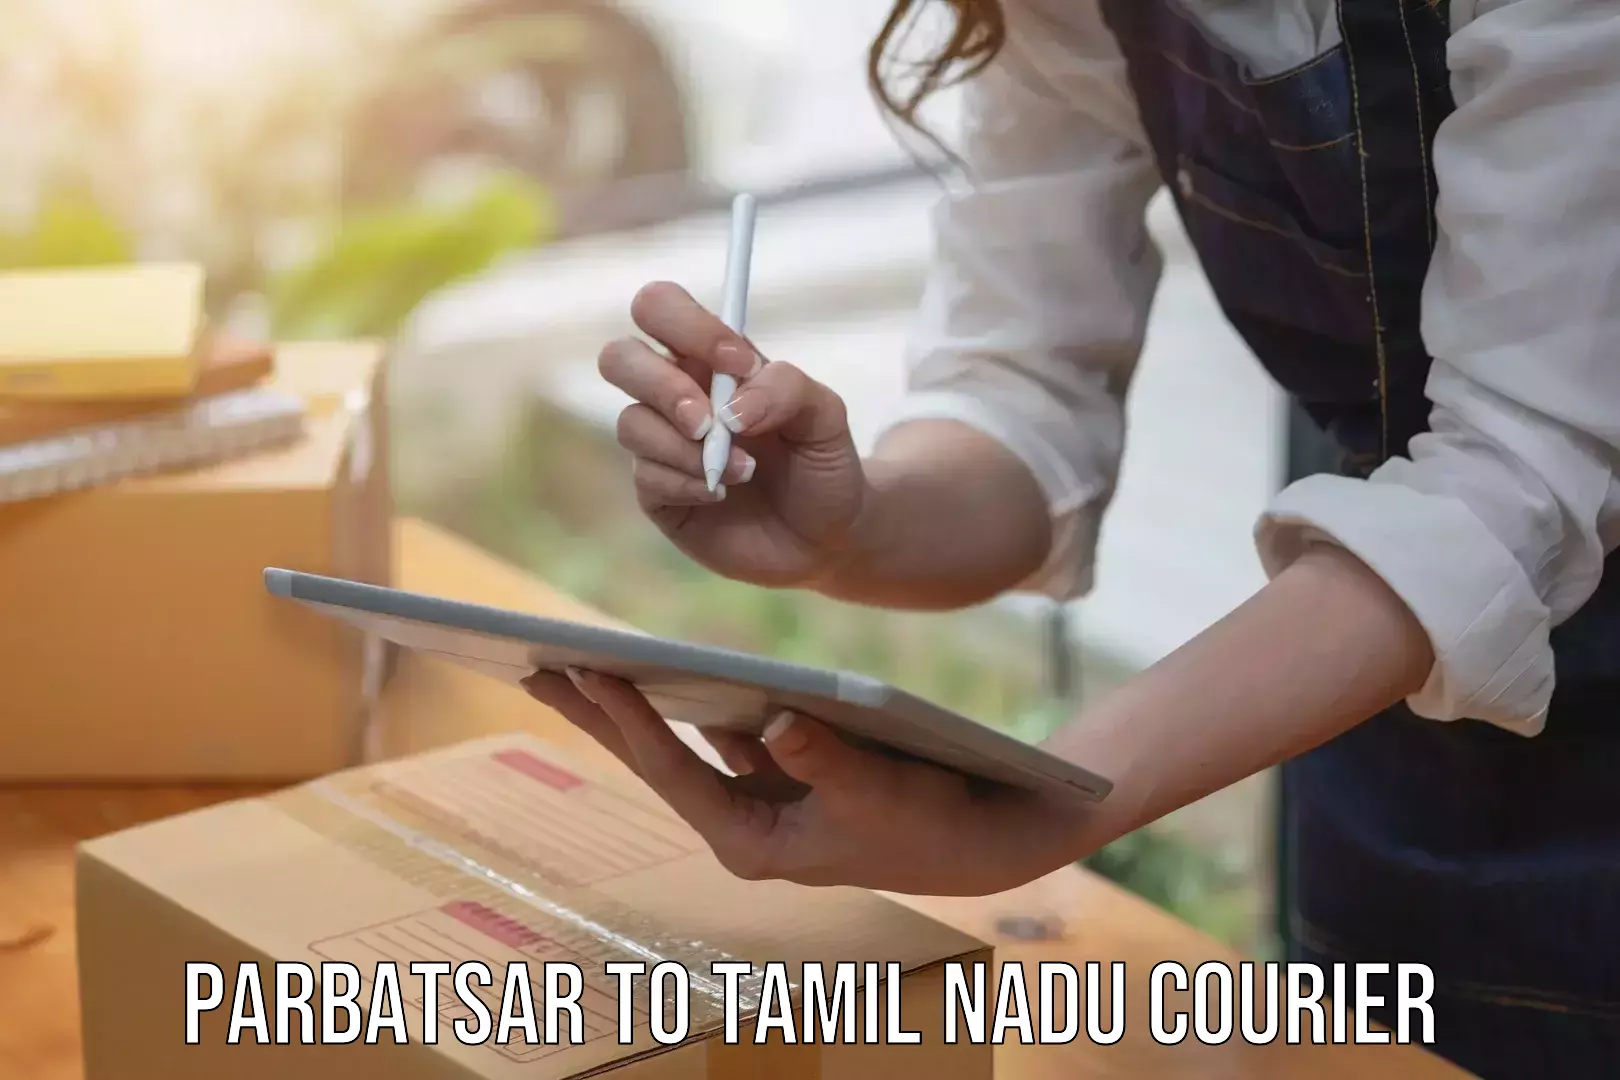 Courier service innovation Parbatsar to Vellore